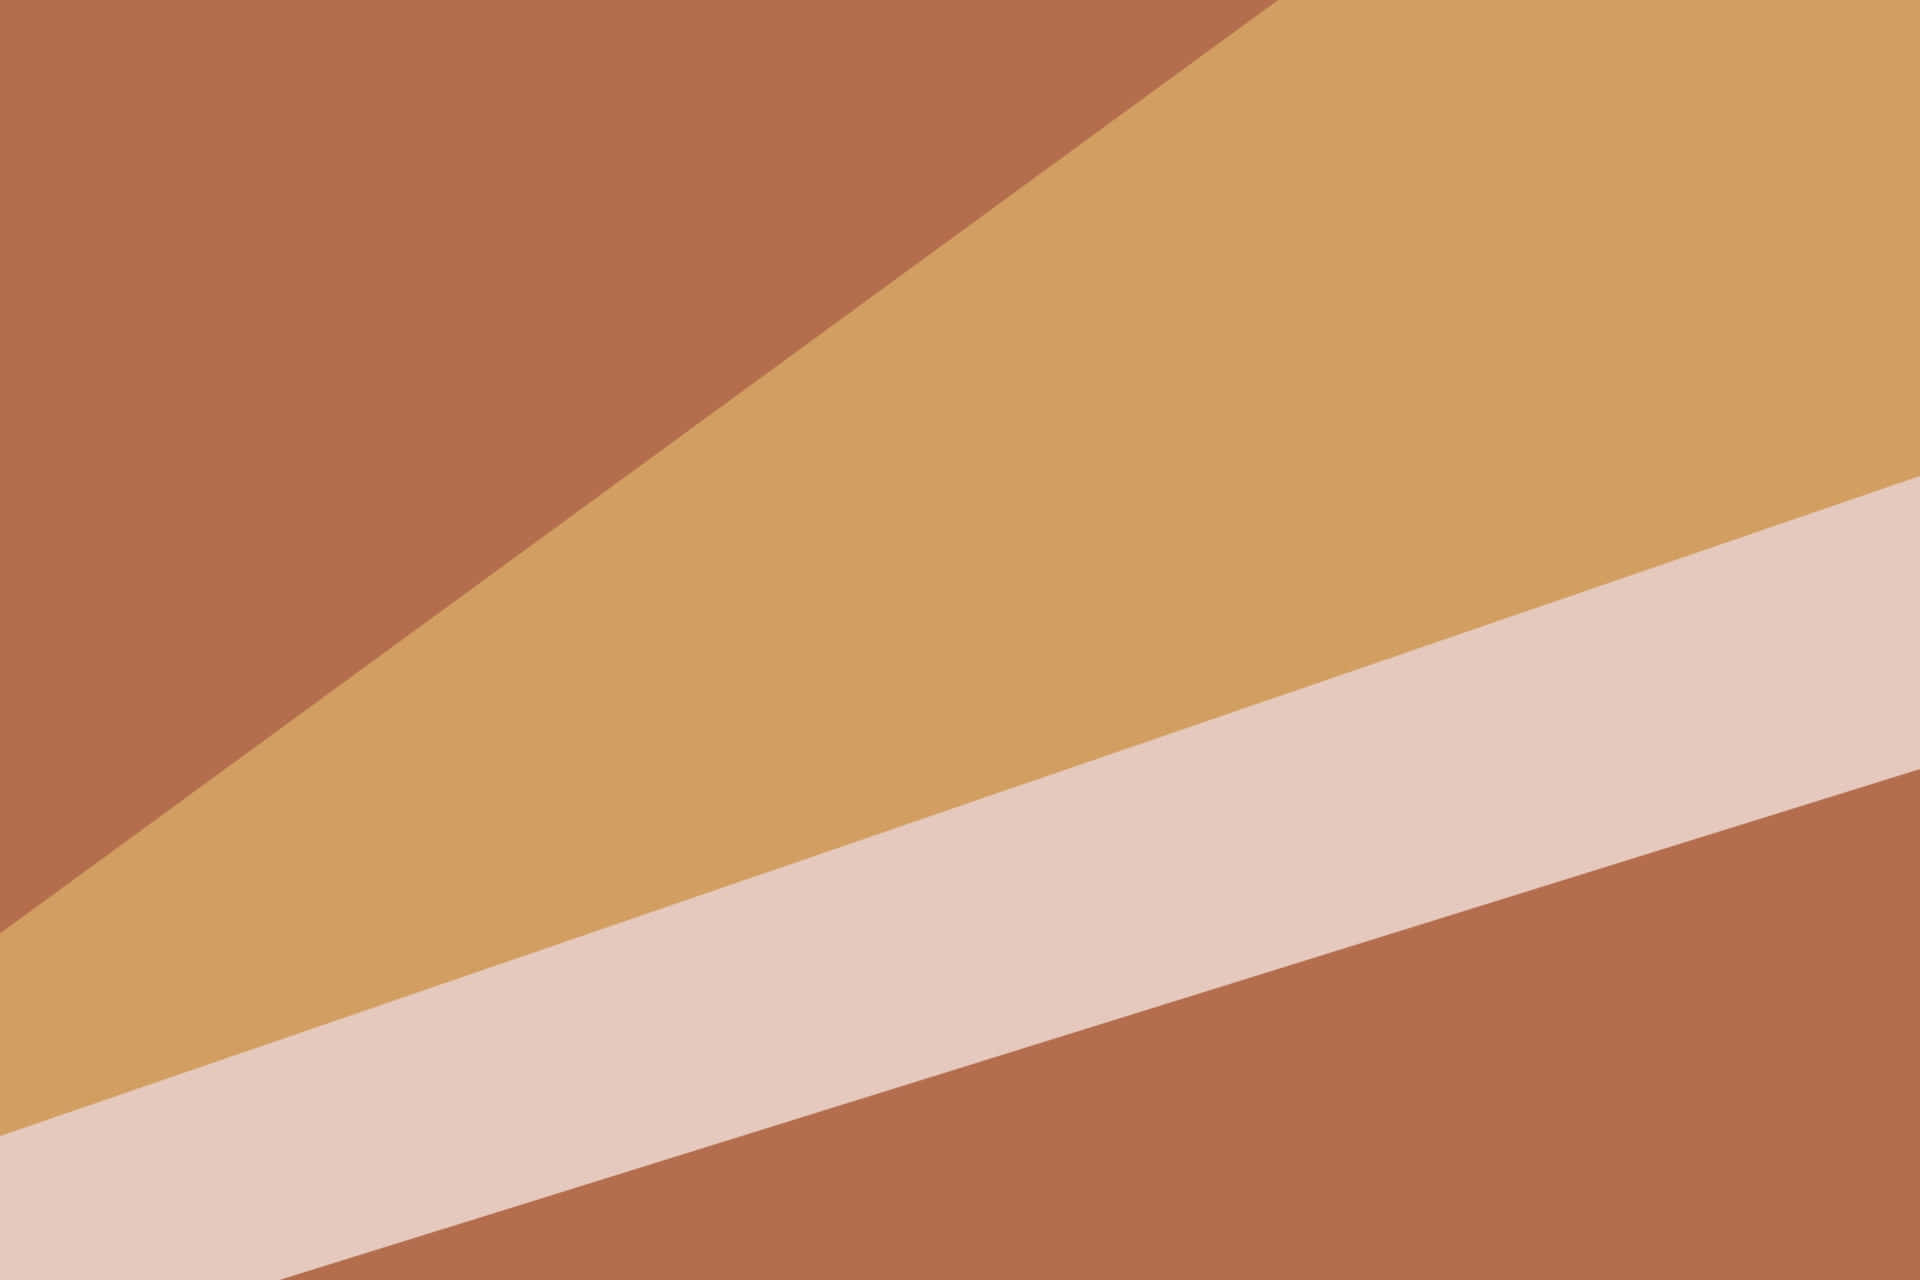 A Beige And Brown Background With A Triangle